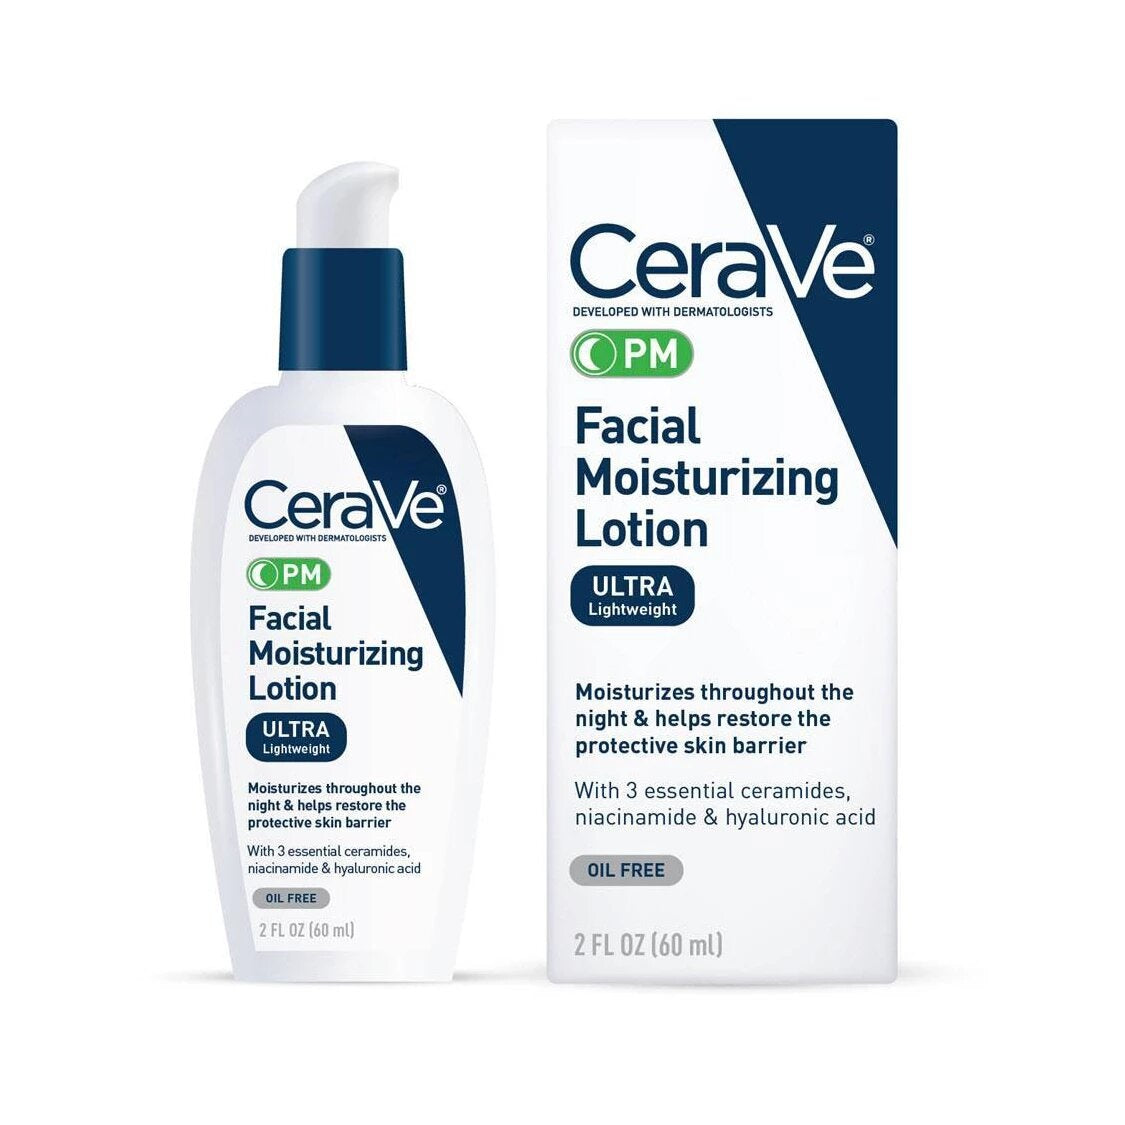 CeraVe PM Facial Moisturizing Lotion for Nighttime